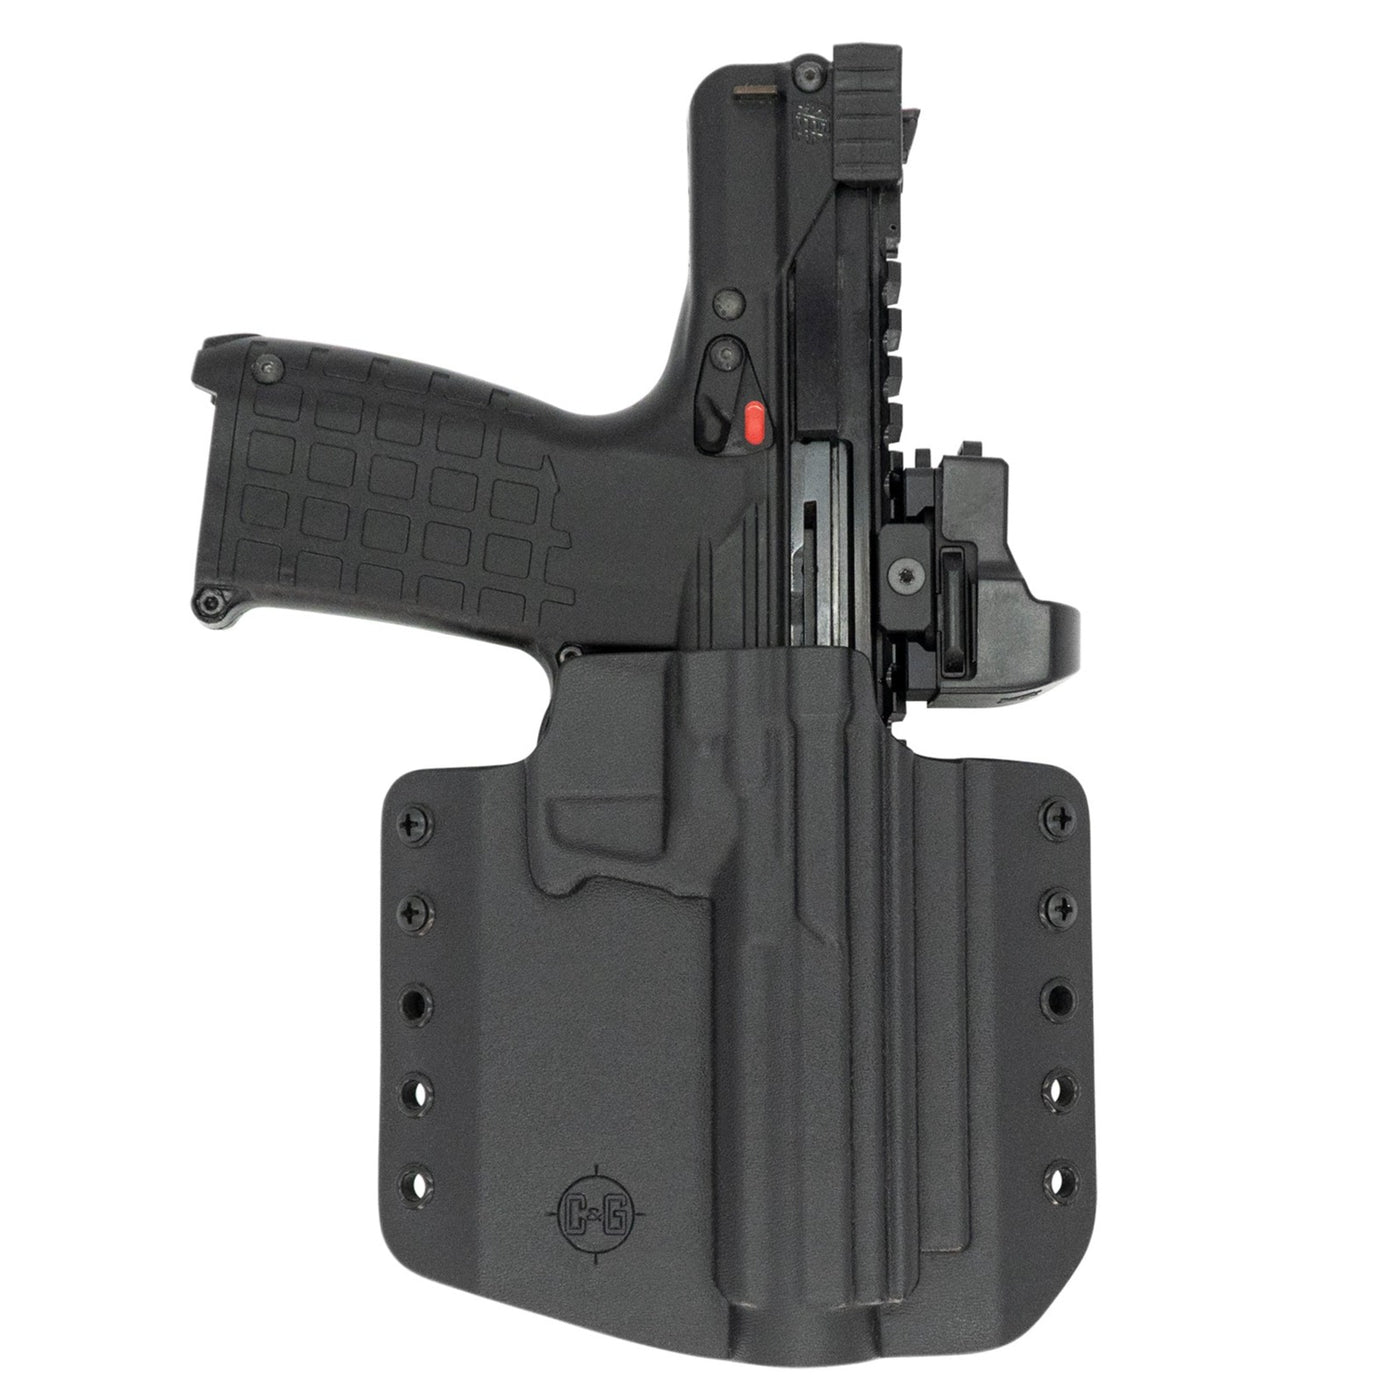 The custom C&G Holsters Outside the waistband for the Kel-Tec CP33